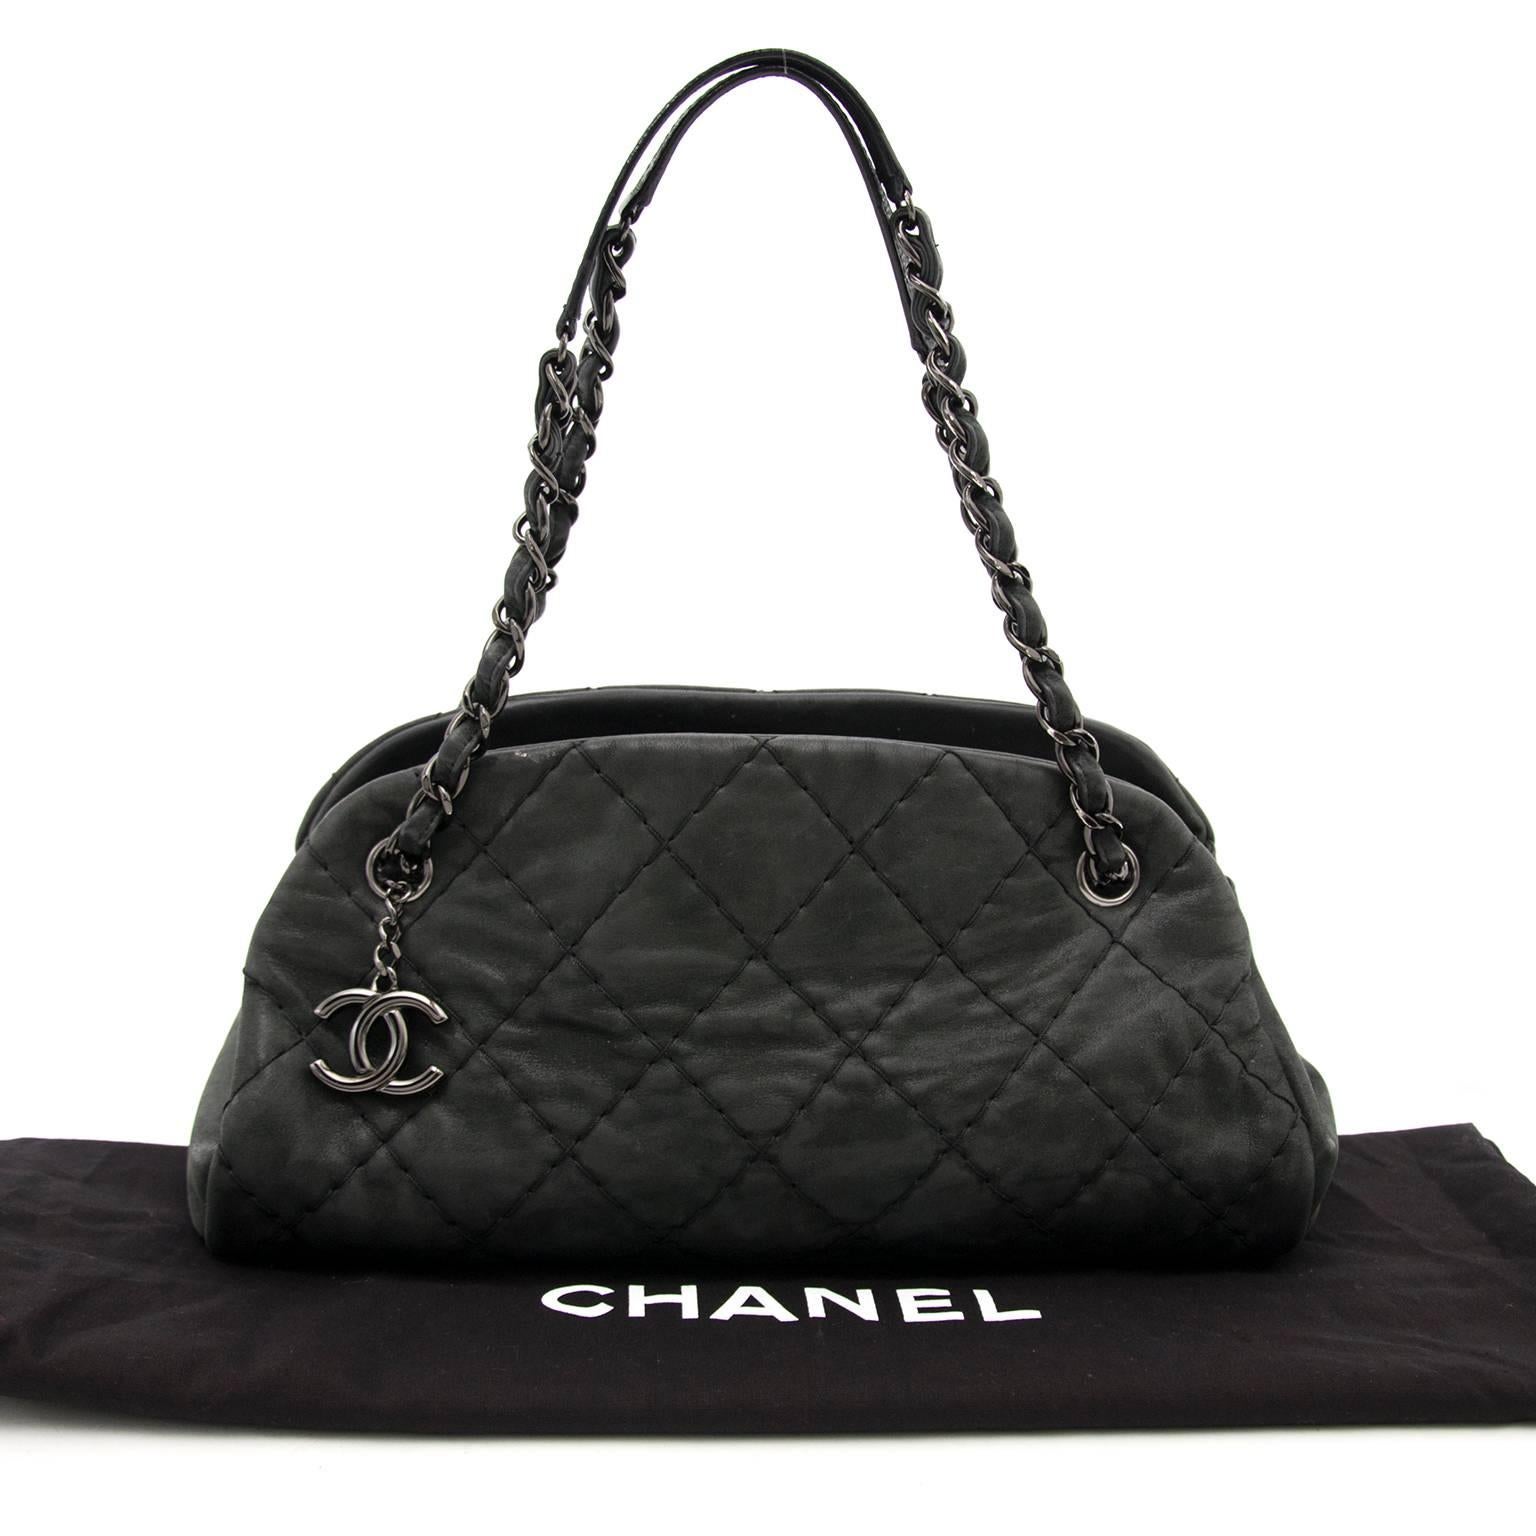 Chanel Black Glazed Calfskin Just Mademoiselle Medium Bowling Bag
The name clarifies it all: elegant, modern and lady-like.
First designed in 2011 but still very famous today due to its timeless design.
Made out of the glazed calfskin with the CC